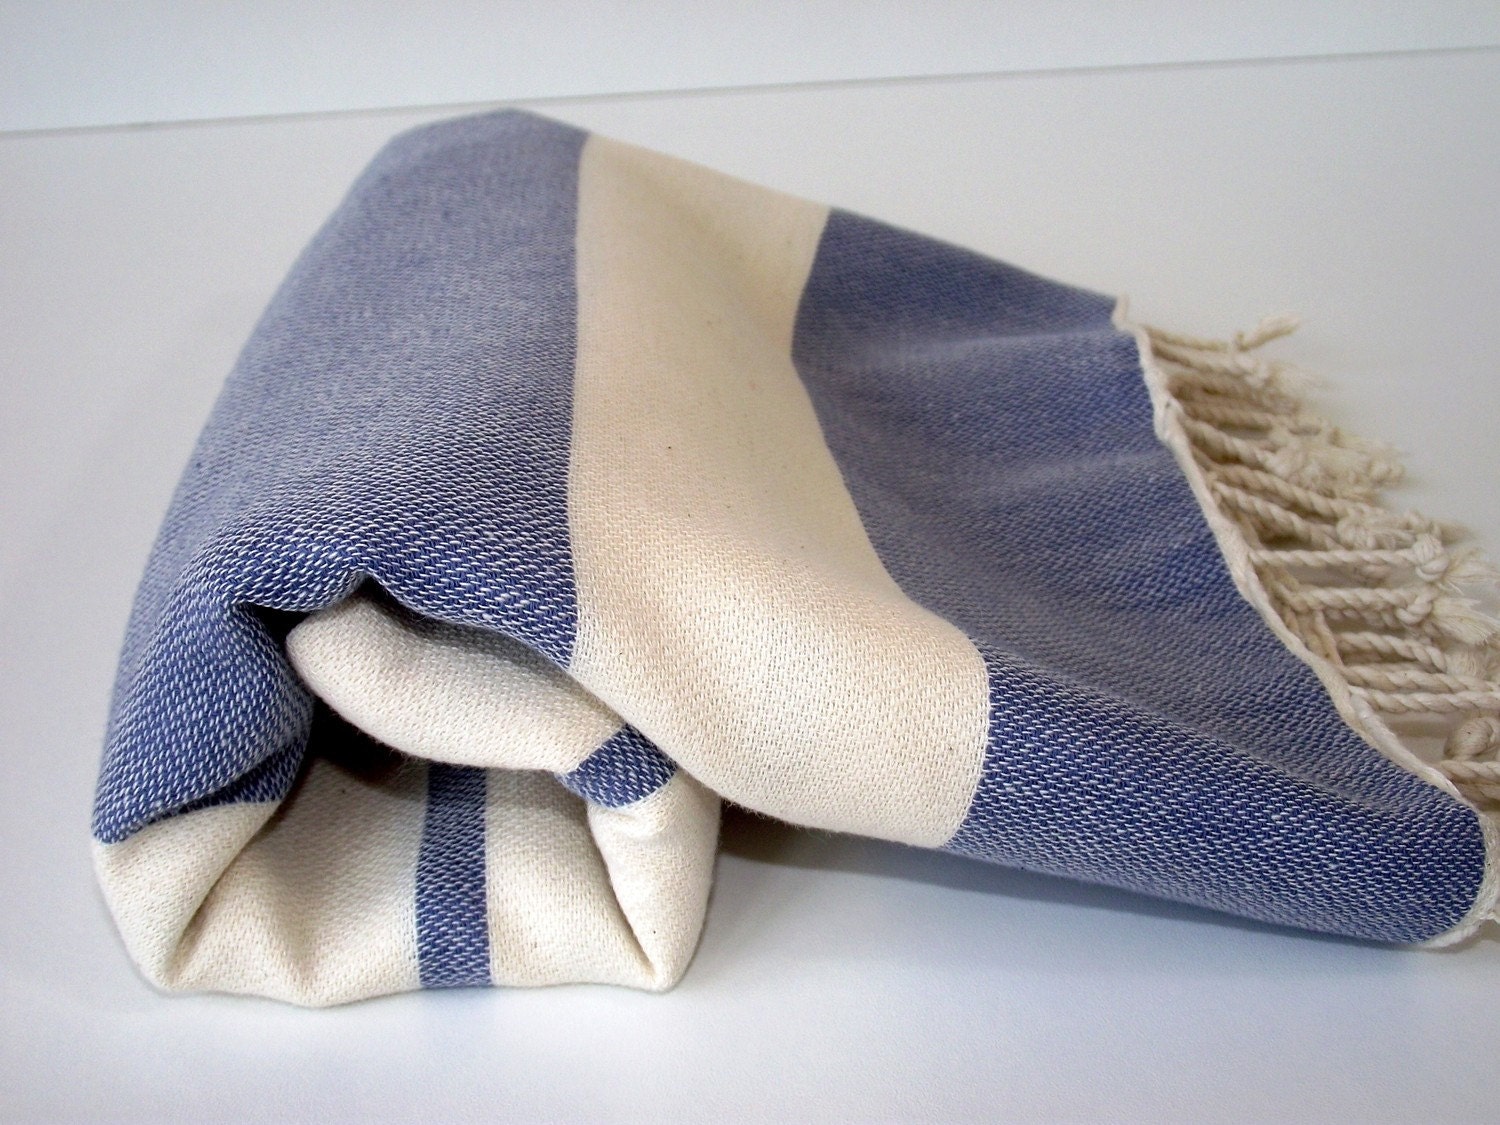 Best Quality Hand - Woven Turkish Cotton Bath Towel or Sarong-Natural Cream and Navy Blue